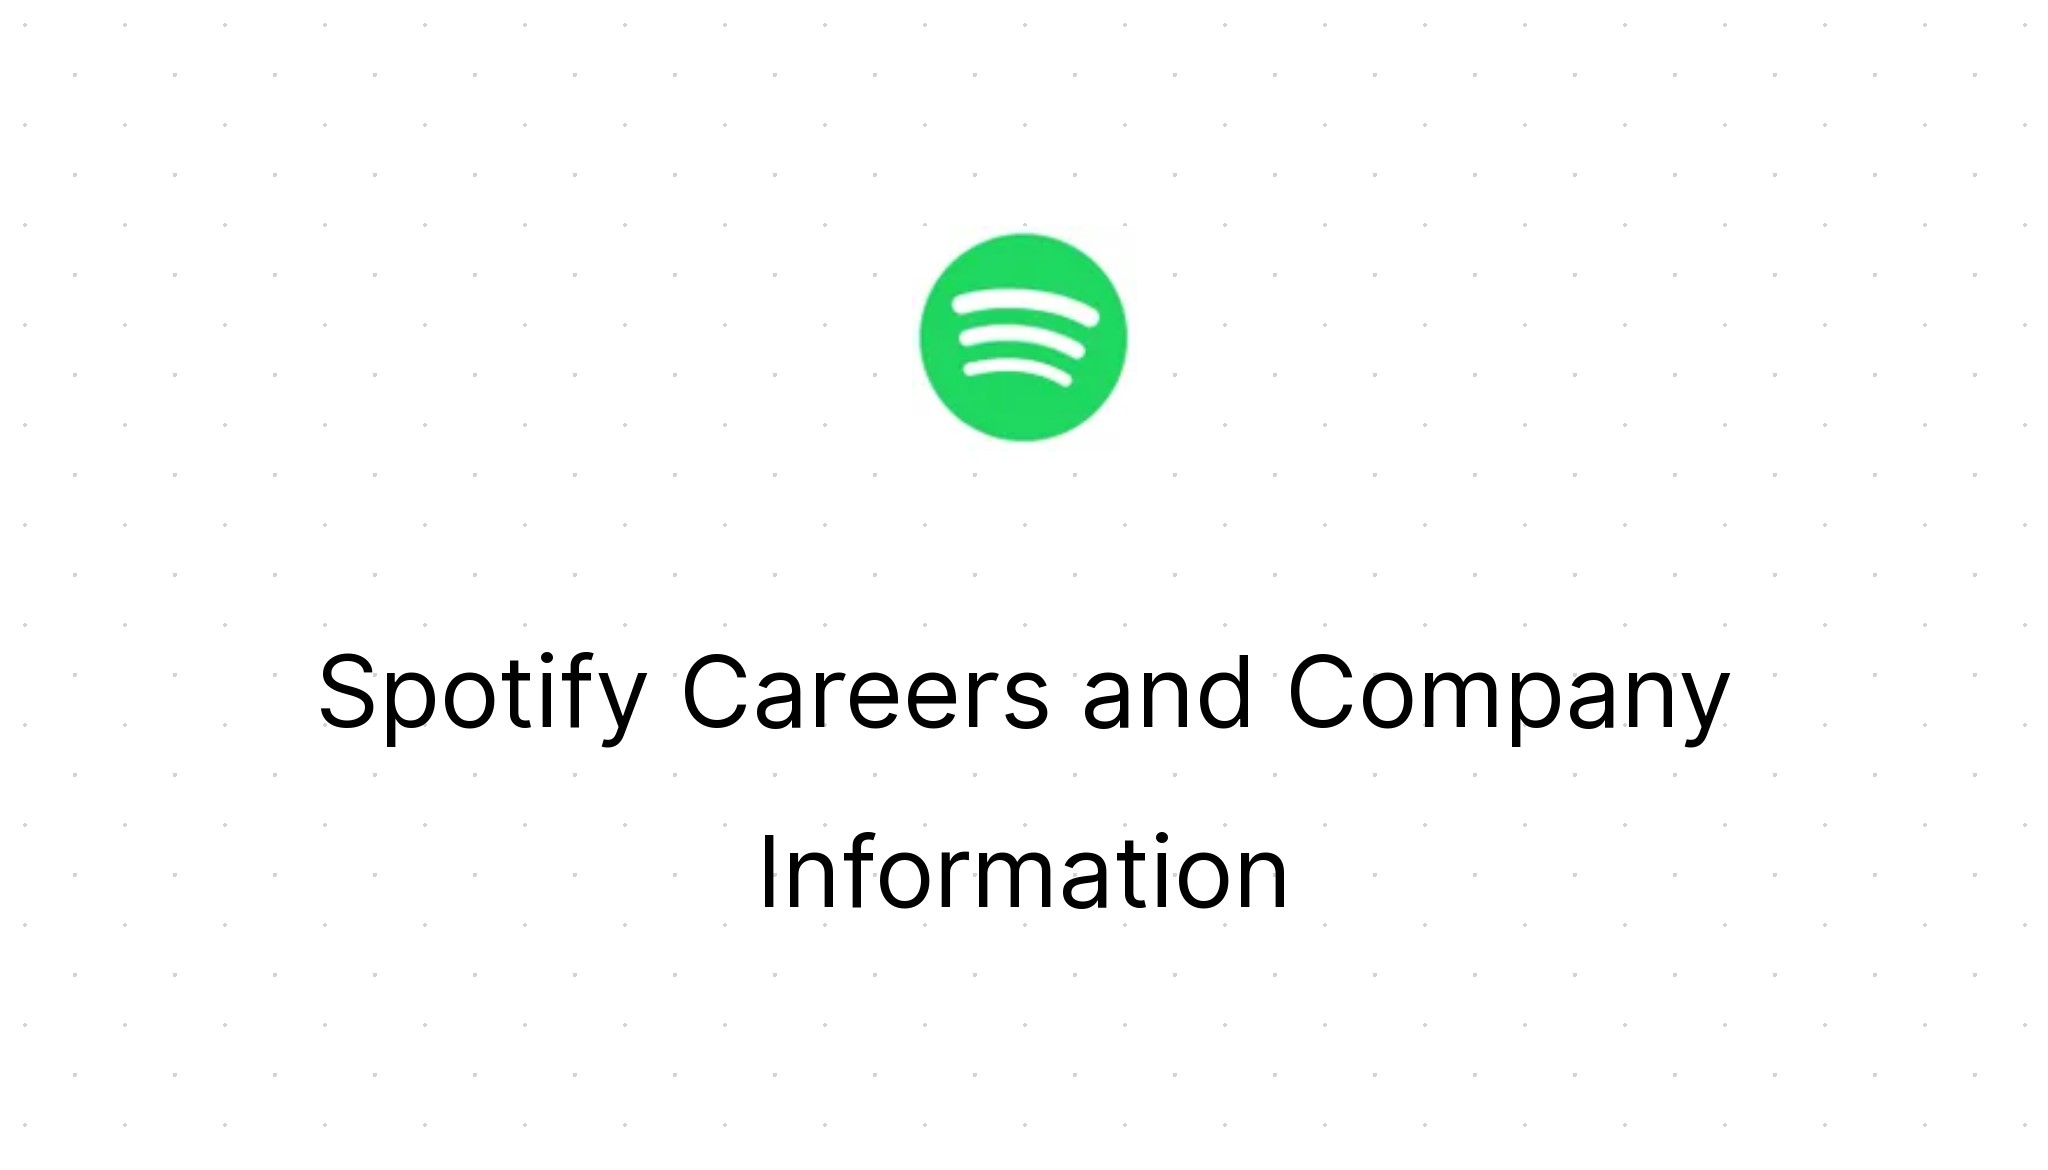 Spotify Careers: How to Work for the Company 16